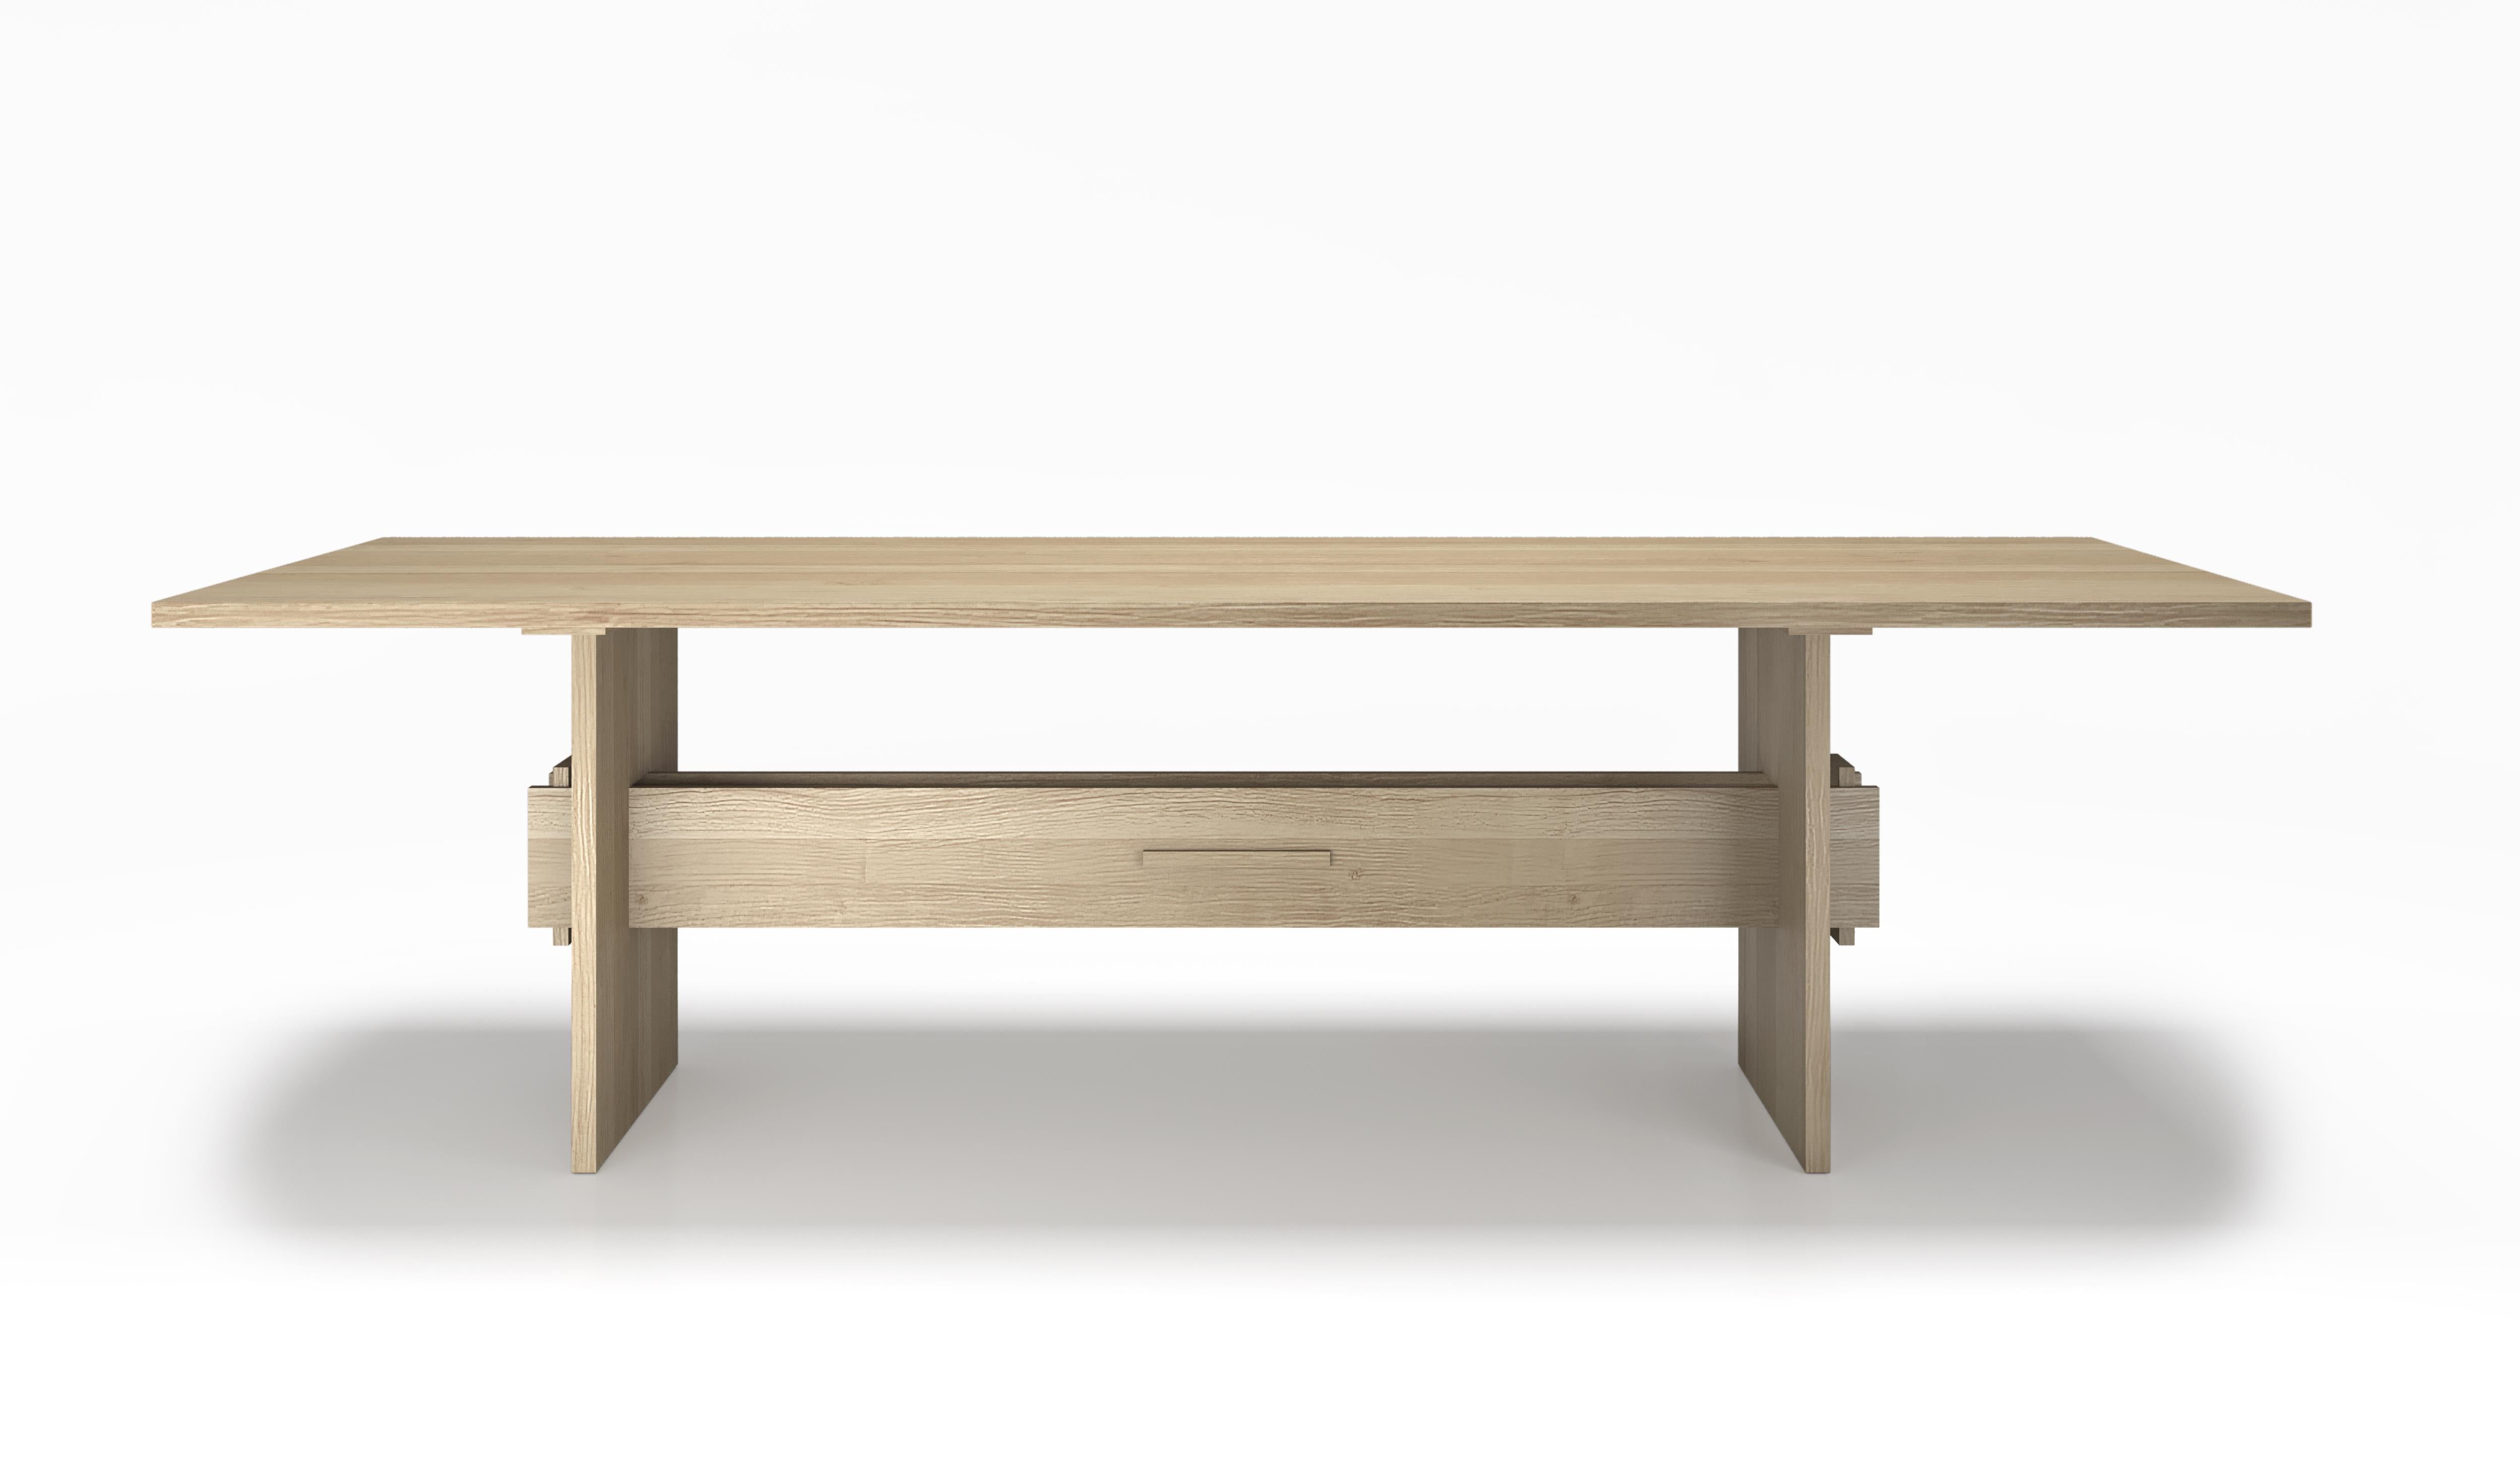 Scandinavian Wooden Table 'Jeppe Utzon #2' by Jeppe Utzon x DK3 In New Condition For Sale In Paris, FR